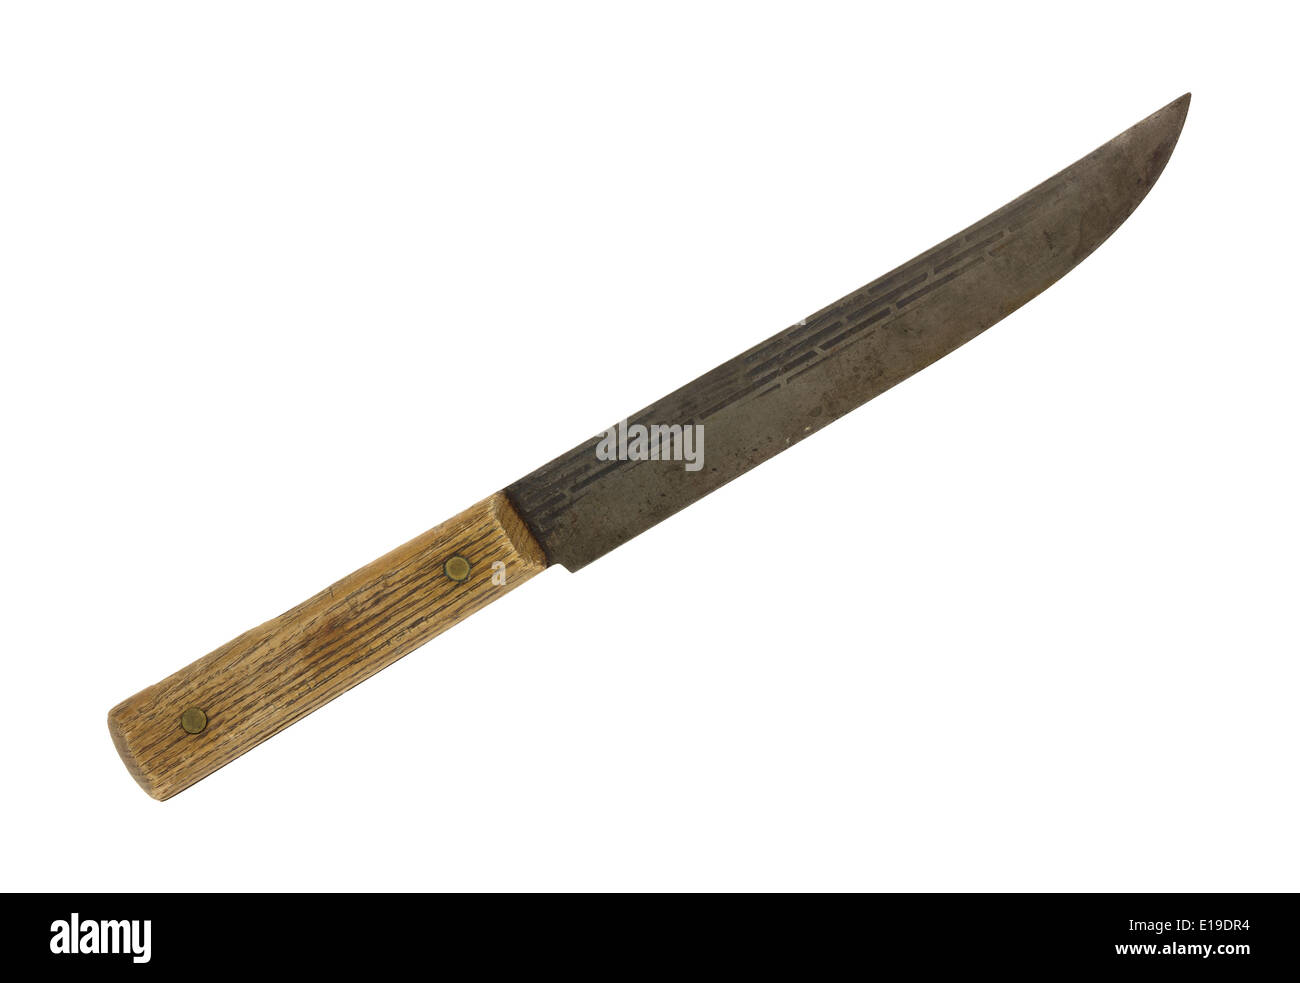 An old wood handled meat knife with a worn blade isolated on a white background. Stock Photo